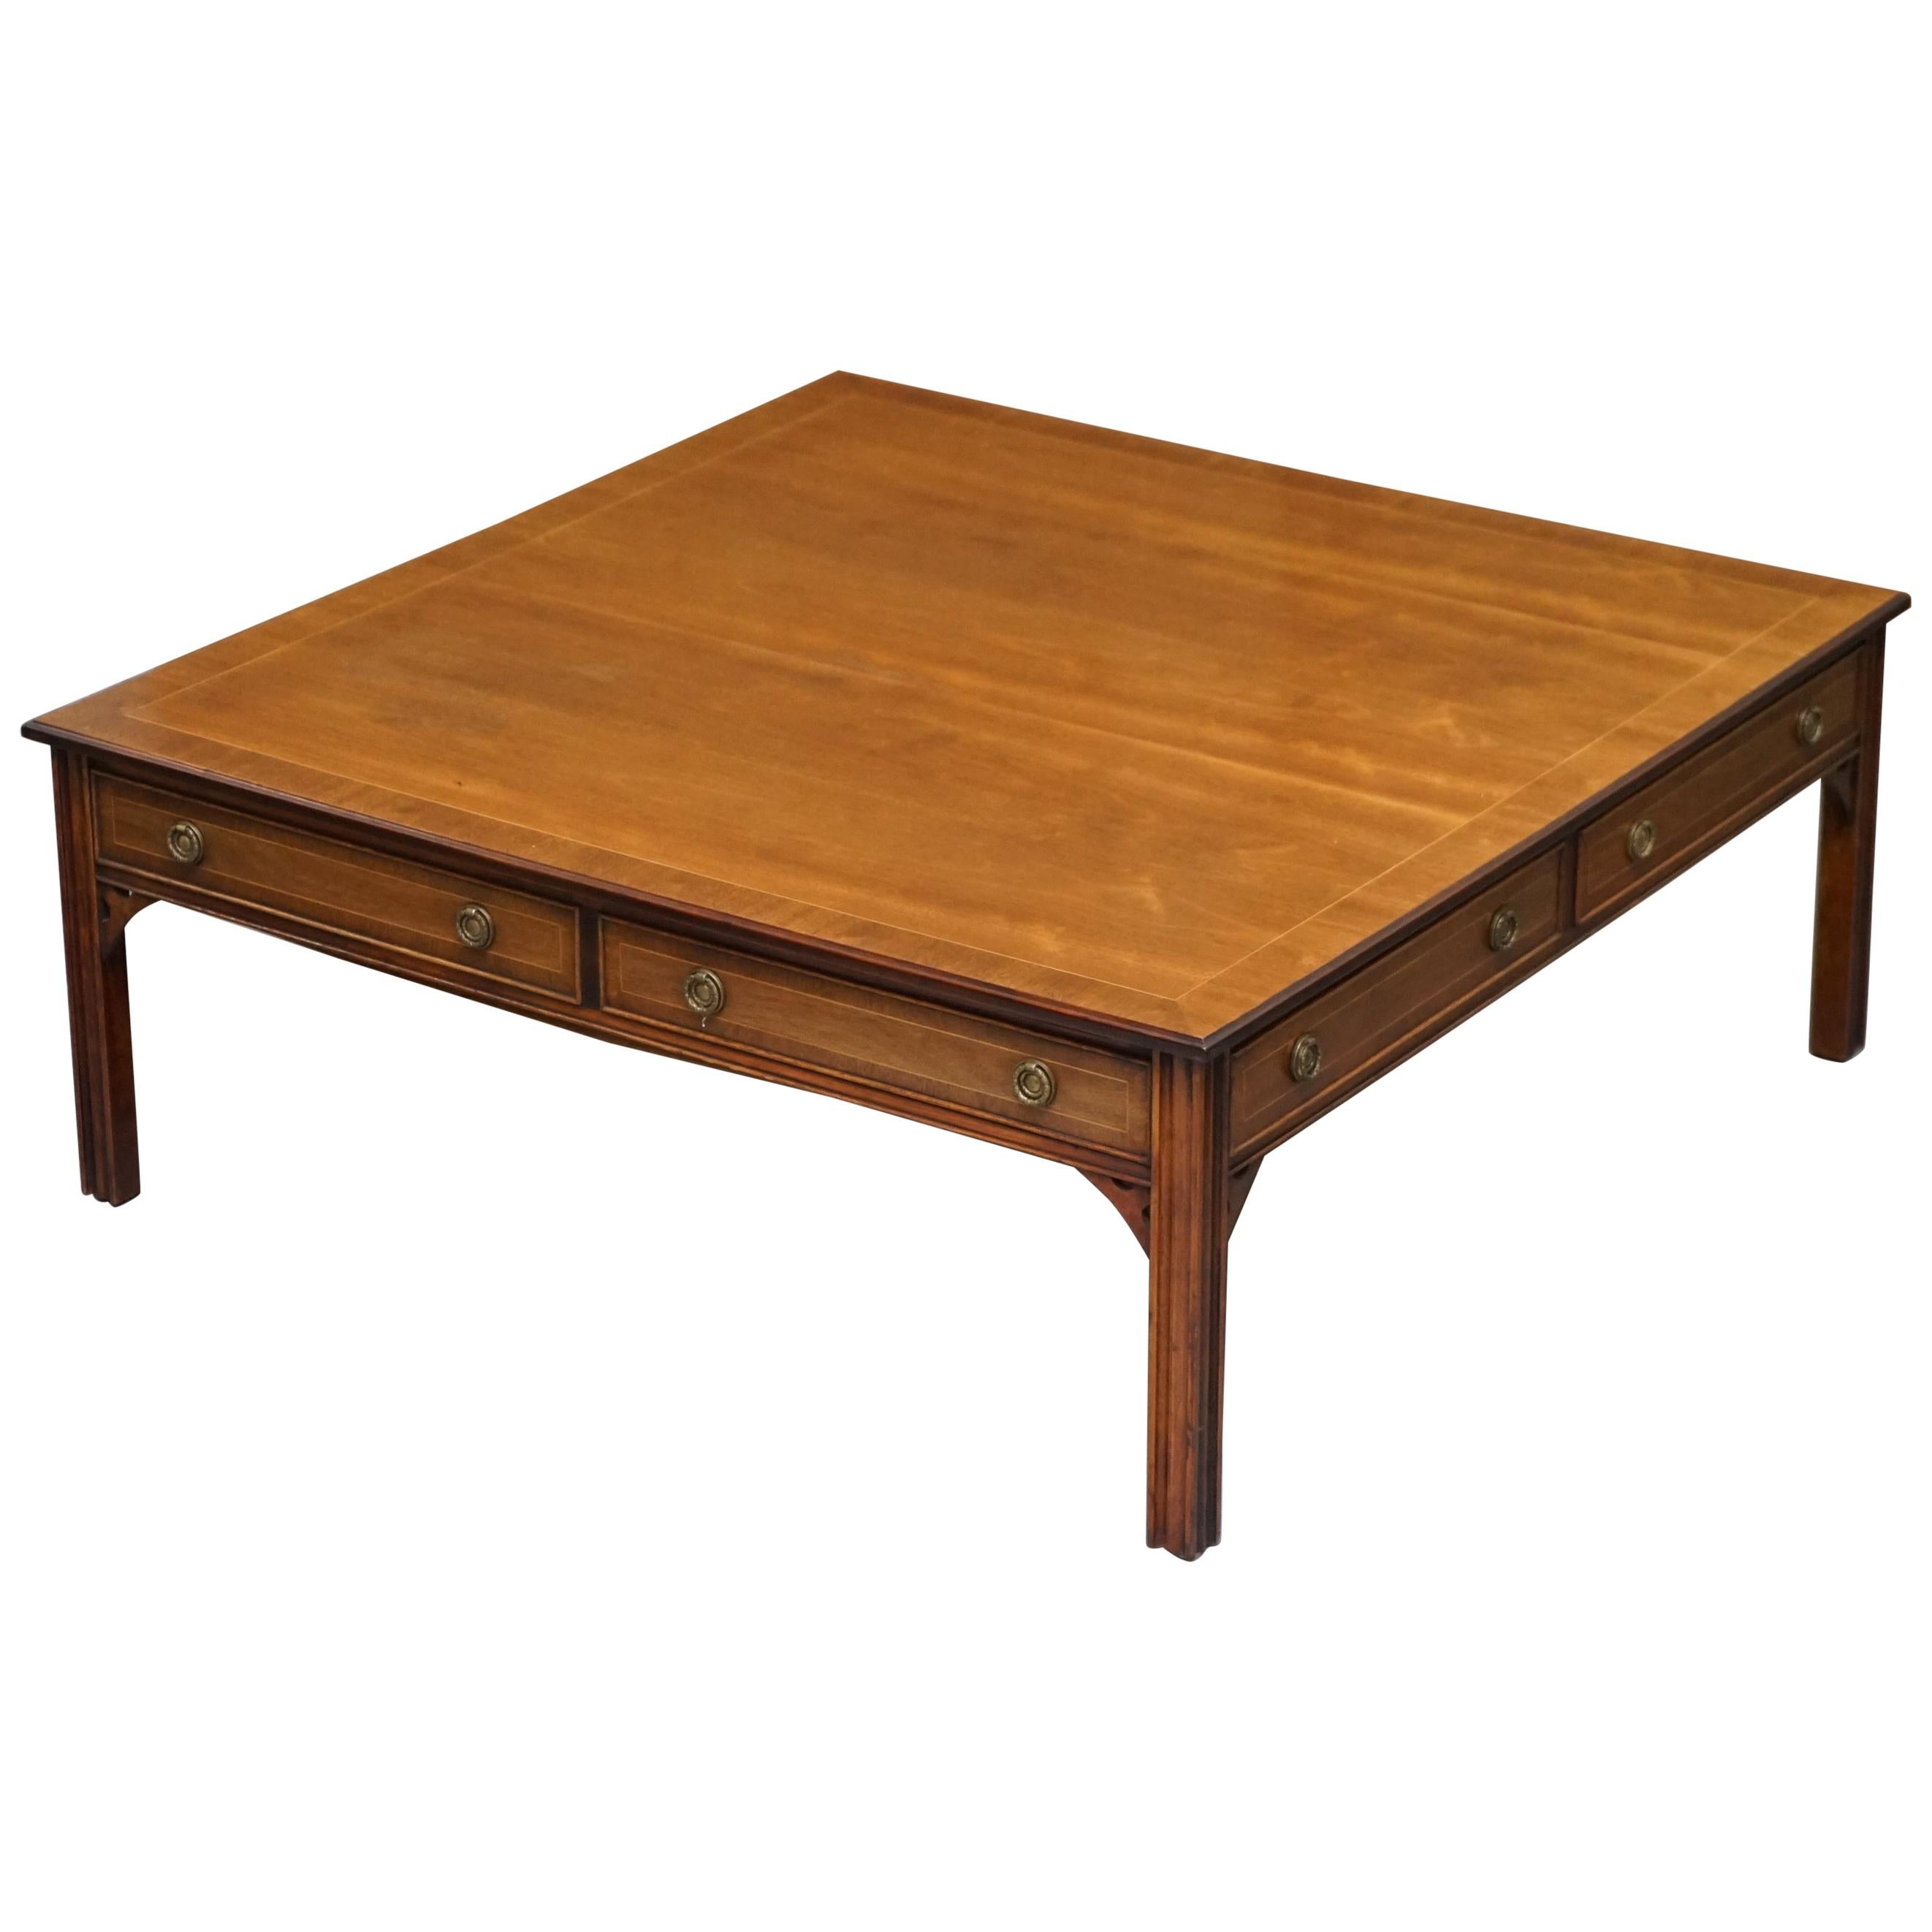 Brights of Nettlebed Very Large Four-Sided Coffee Table in Mahogany